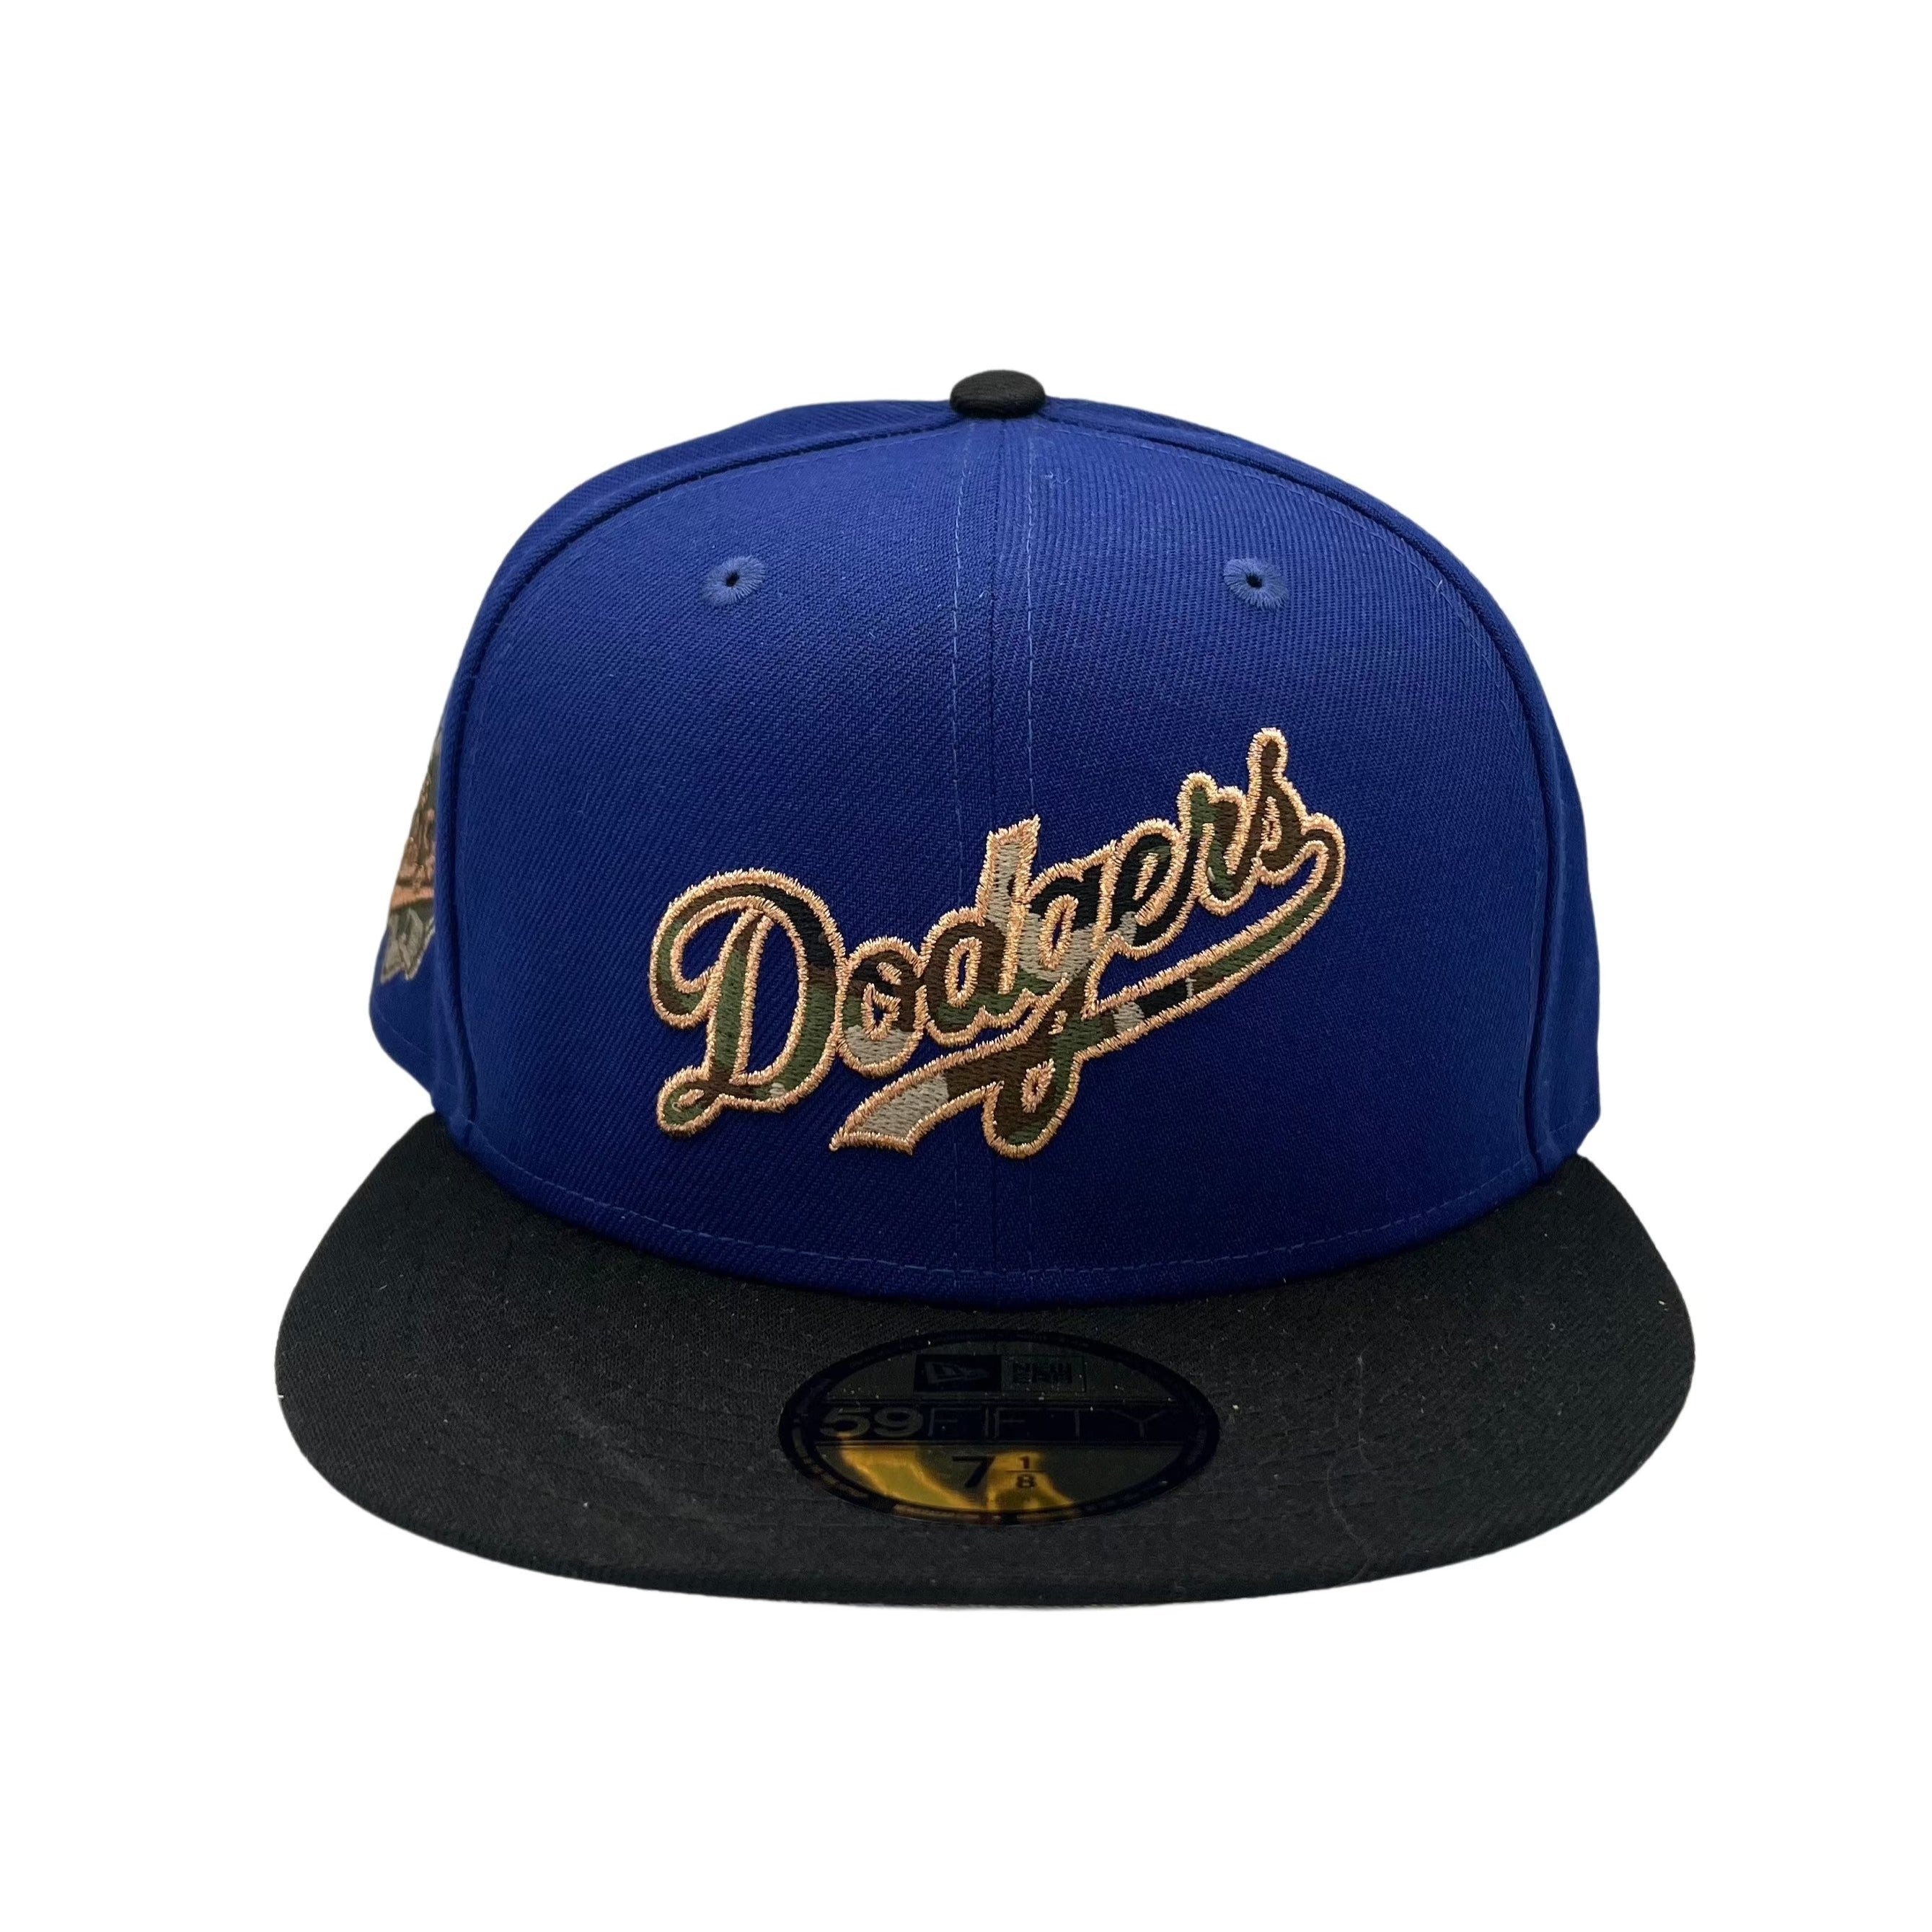 Los Angeles Dodgers Camo Fill Fitted Cap